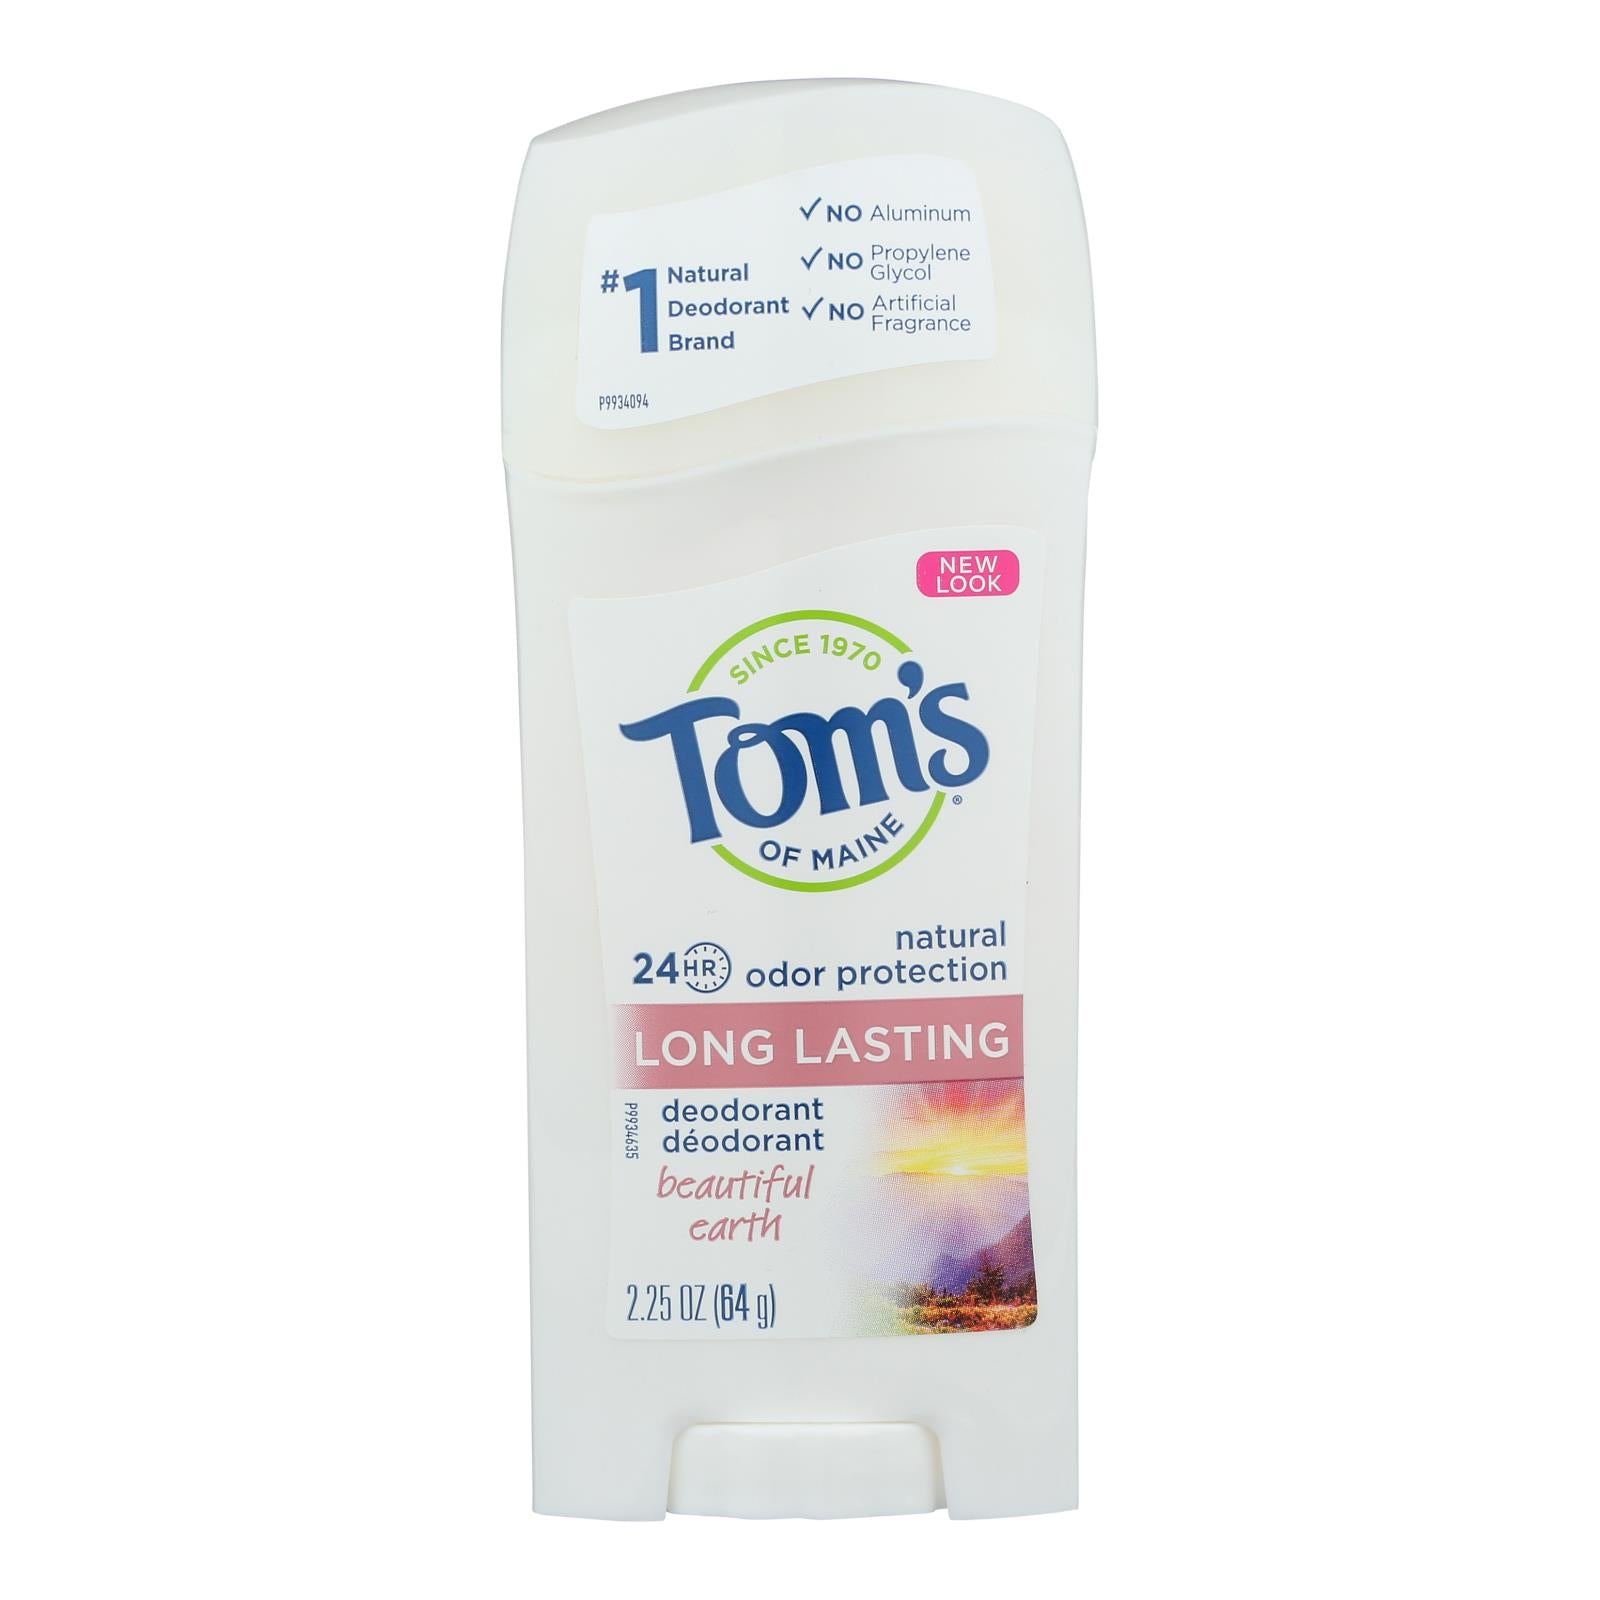 Tom's Of Maine Natural Women's Deodorant - Beautiful Earth - Case Of 6 - 2.25 Oz